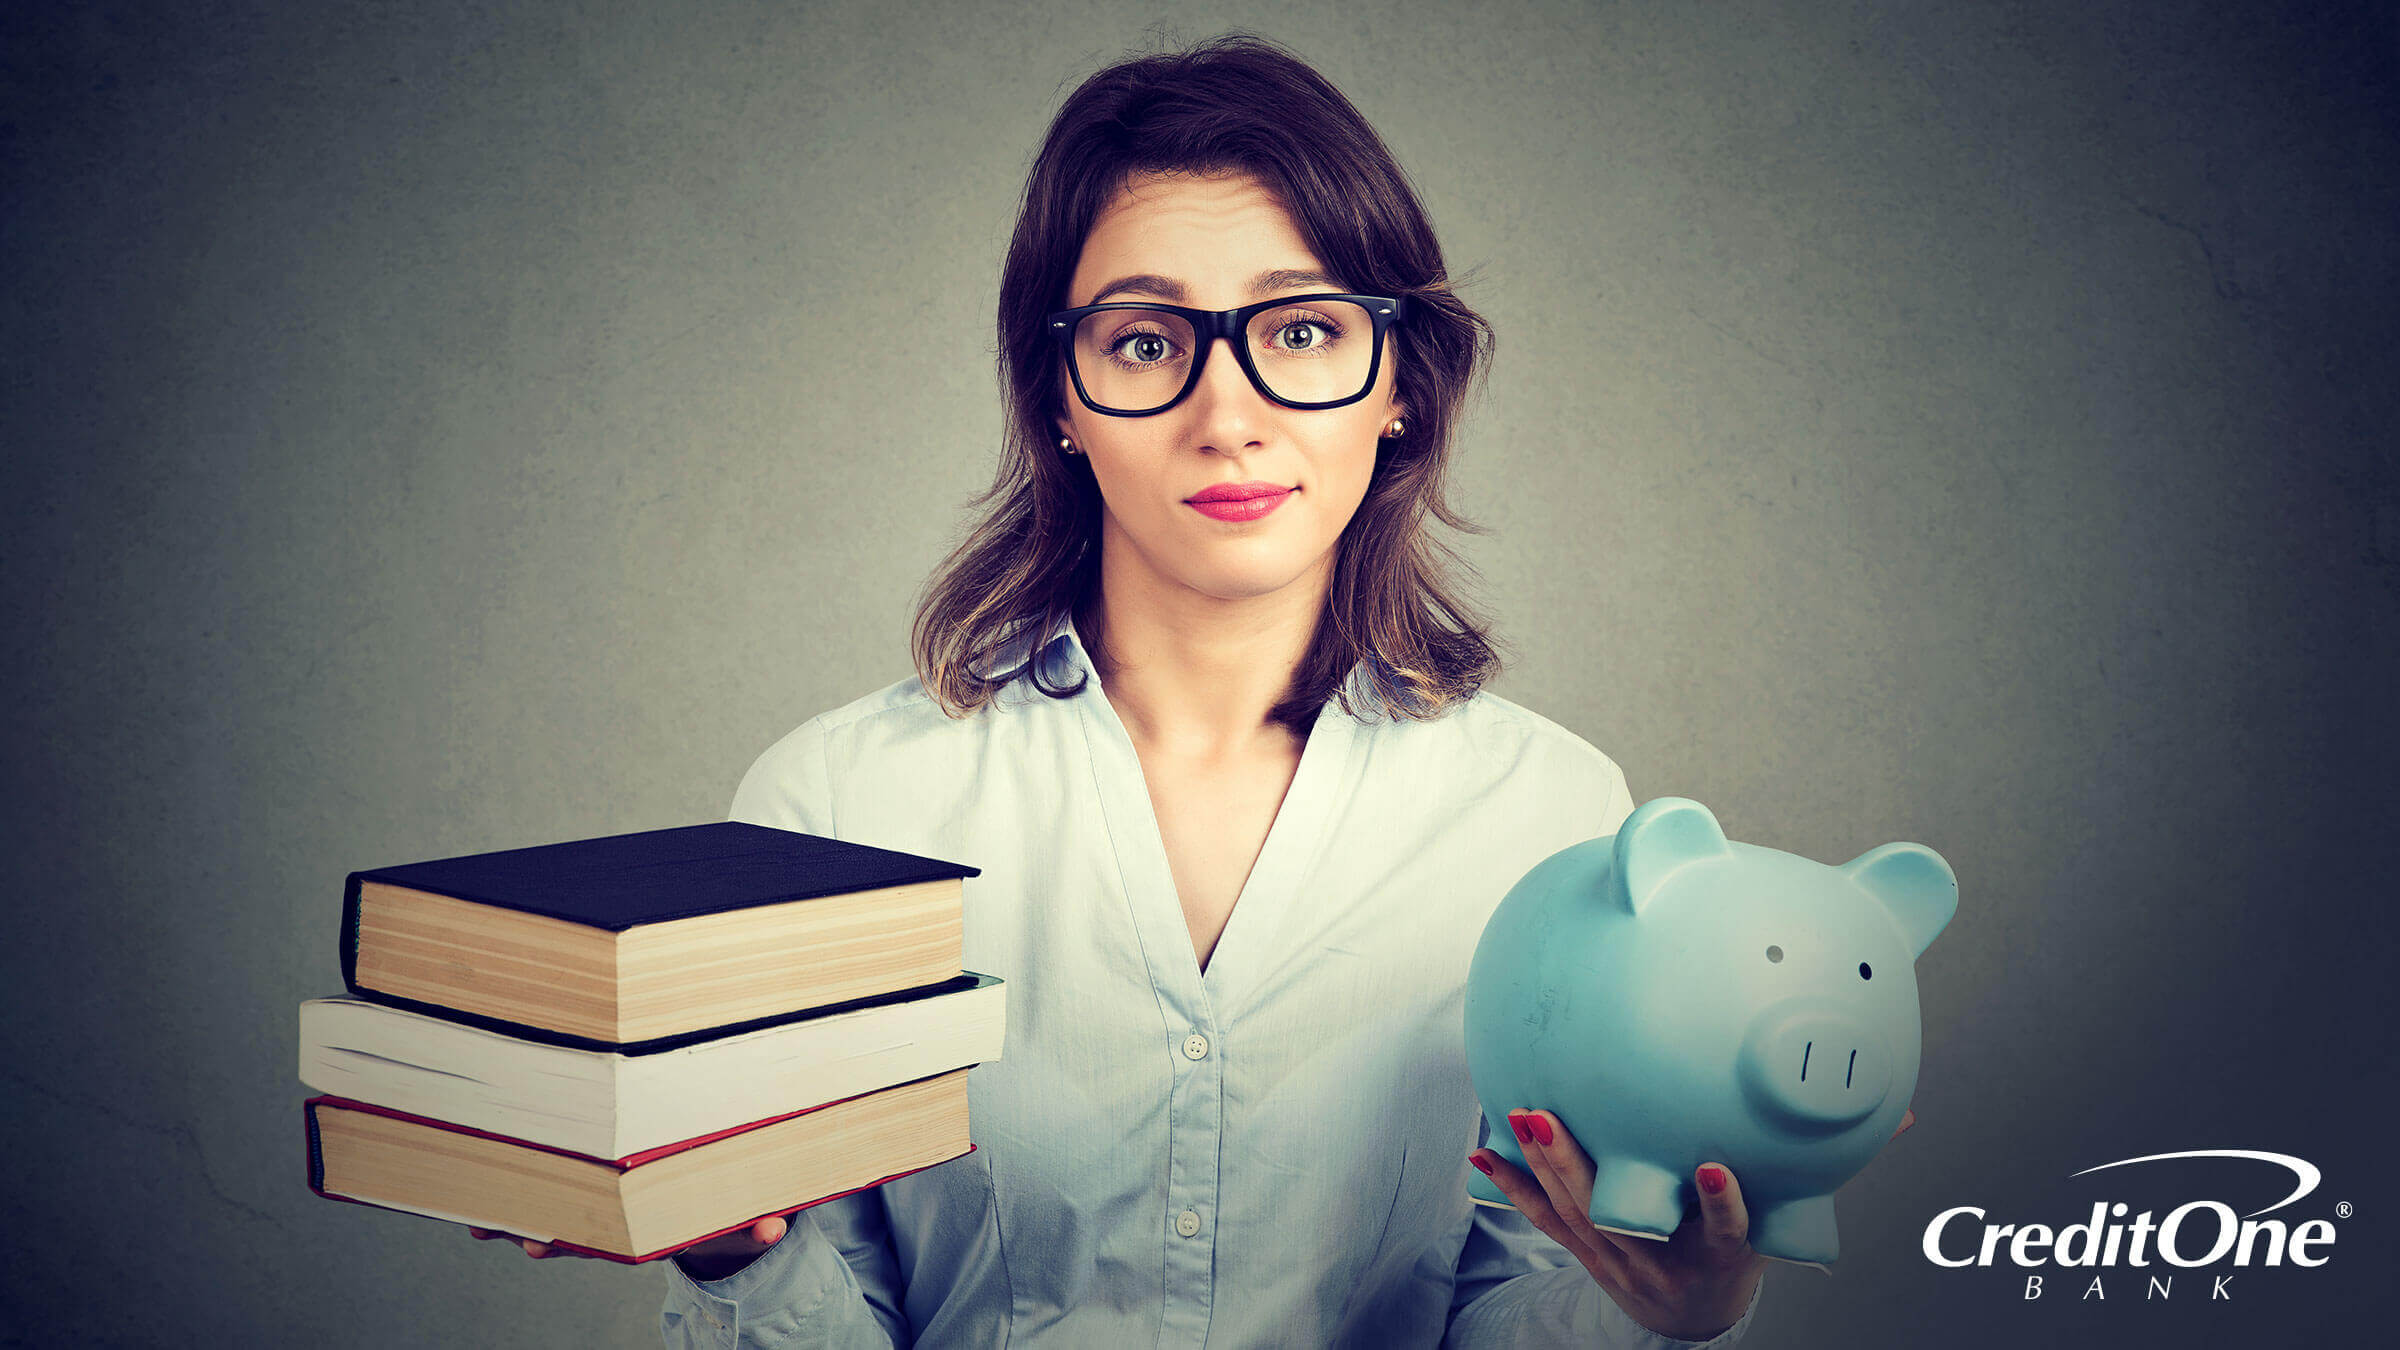 A woman holding a stack of books in one hand and a piggy bank in another, signifying paying for tuition.